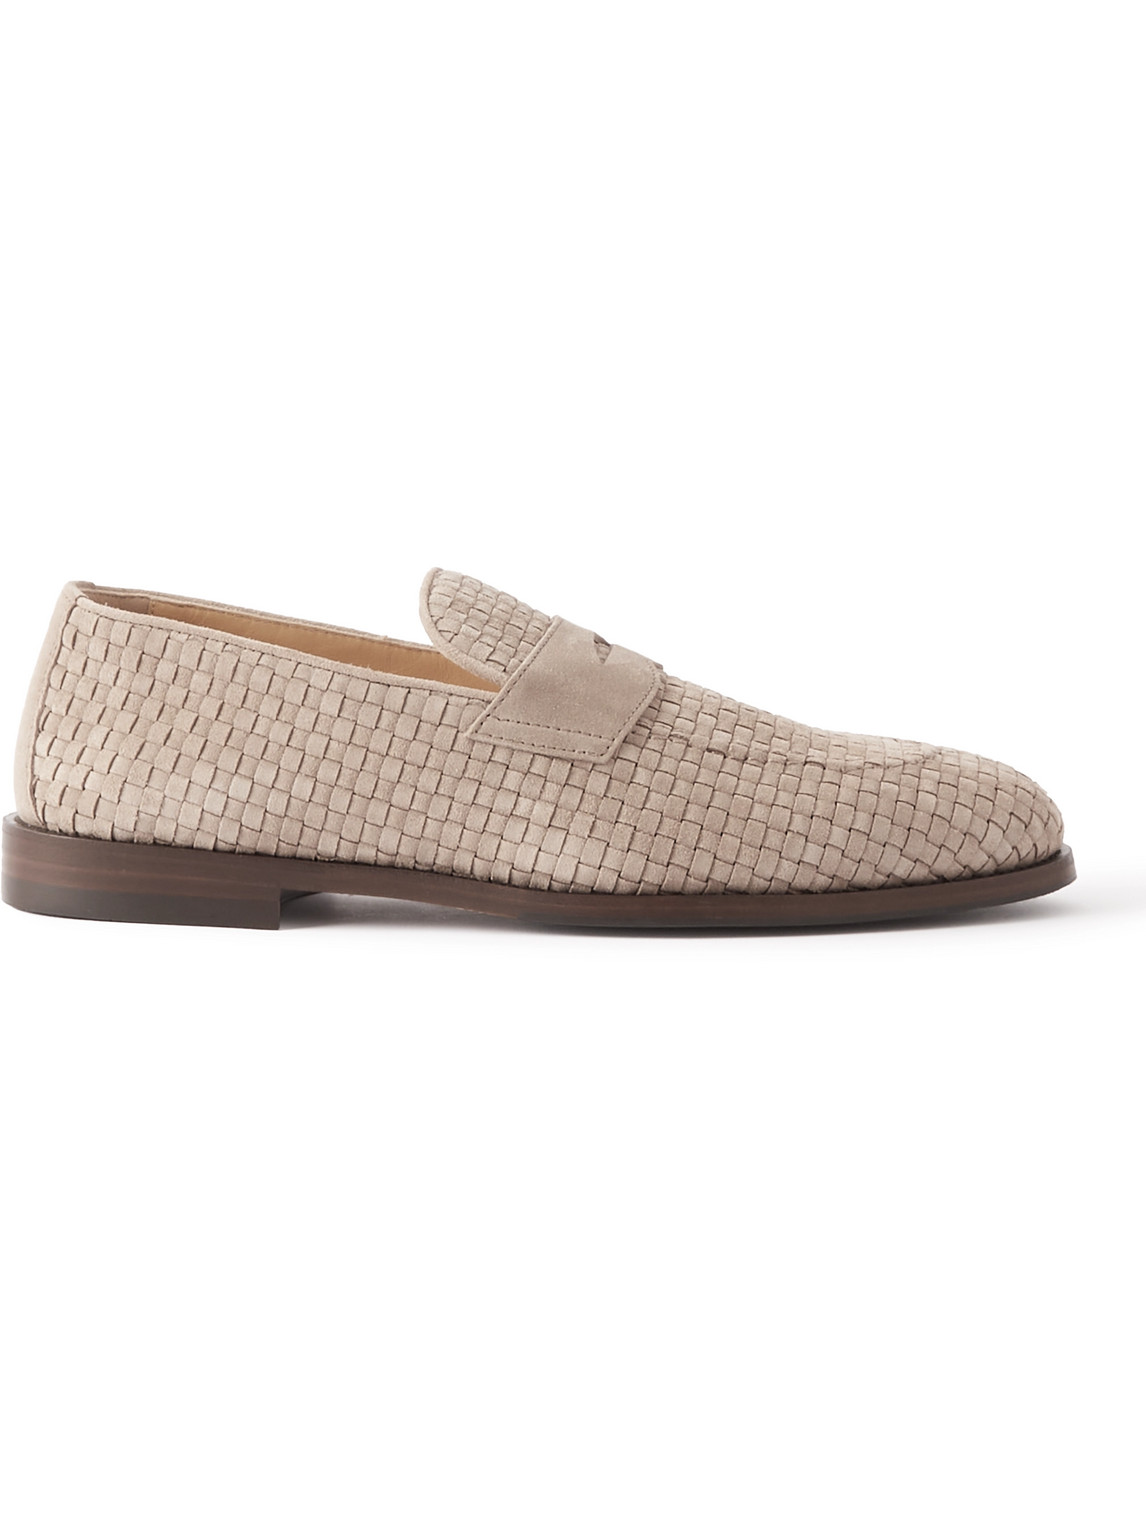 BRUNELLO CUCINELLI WOVEN SUEDE PENNY LOAFERS